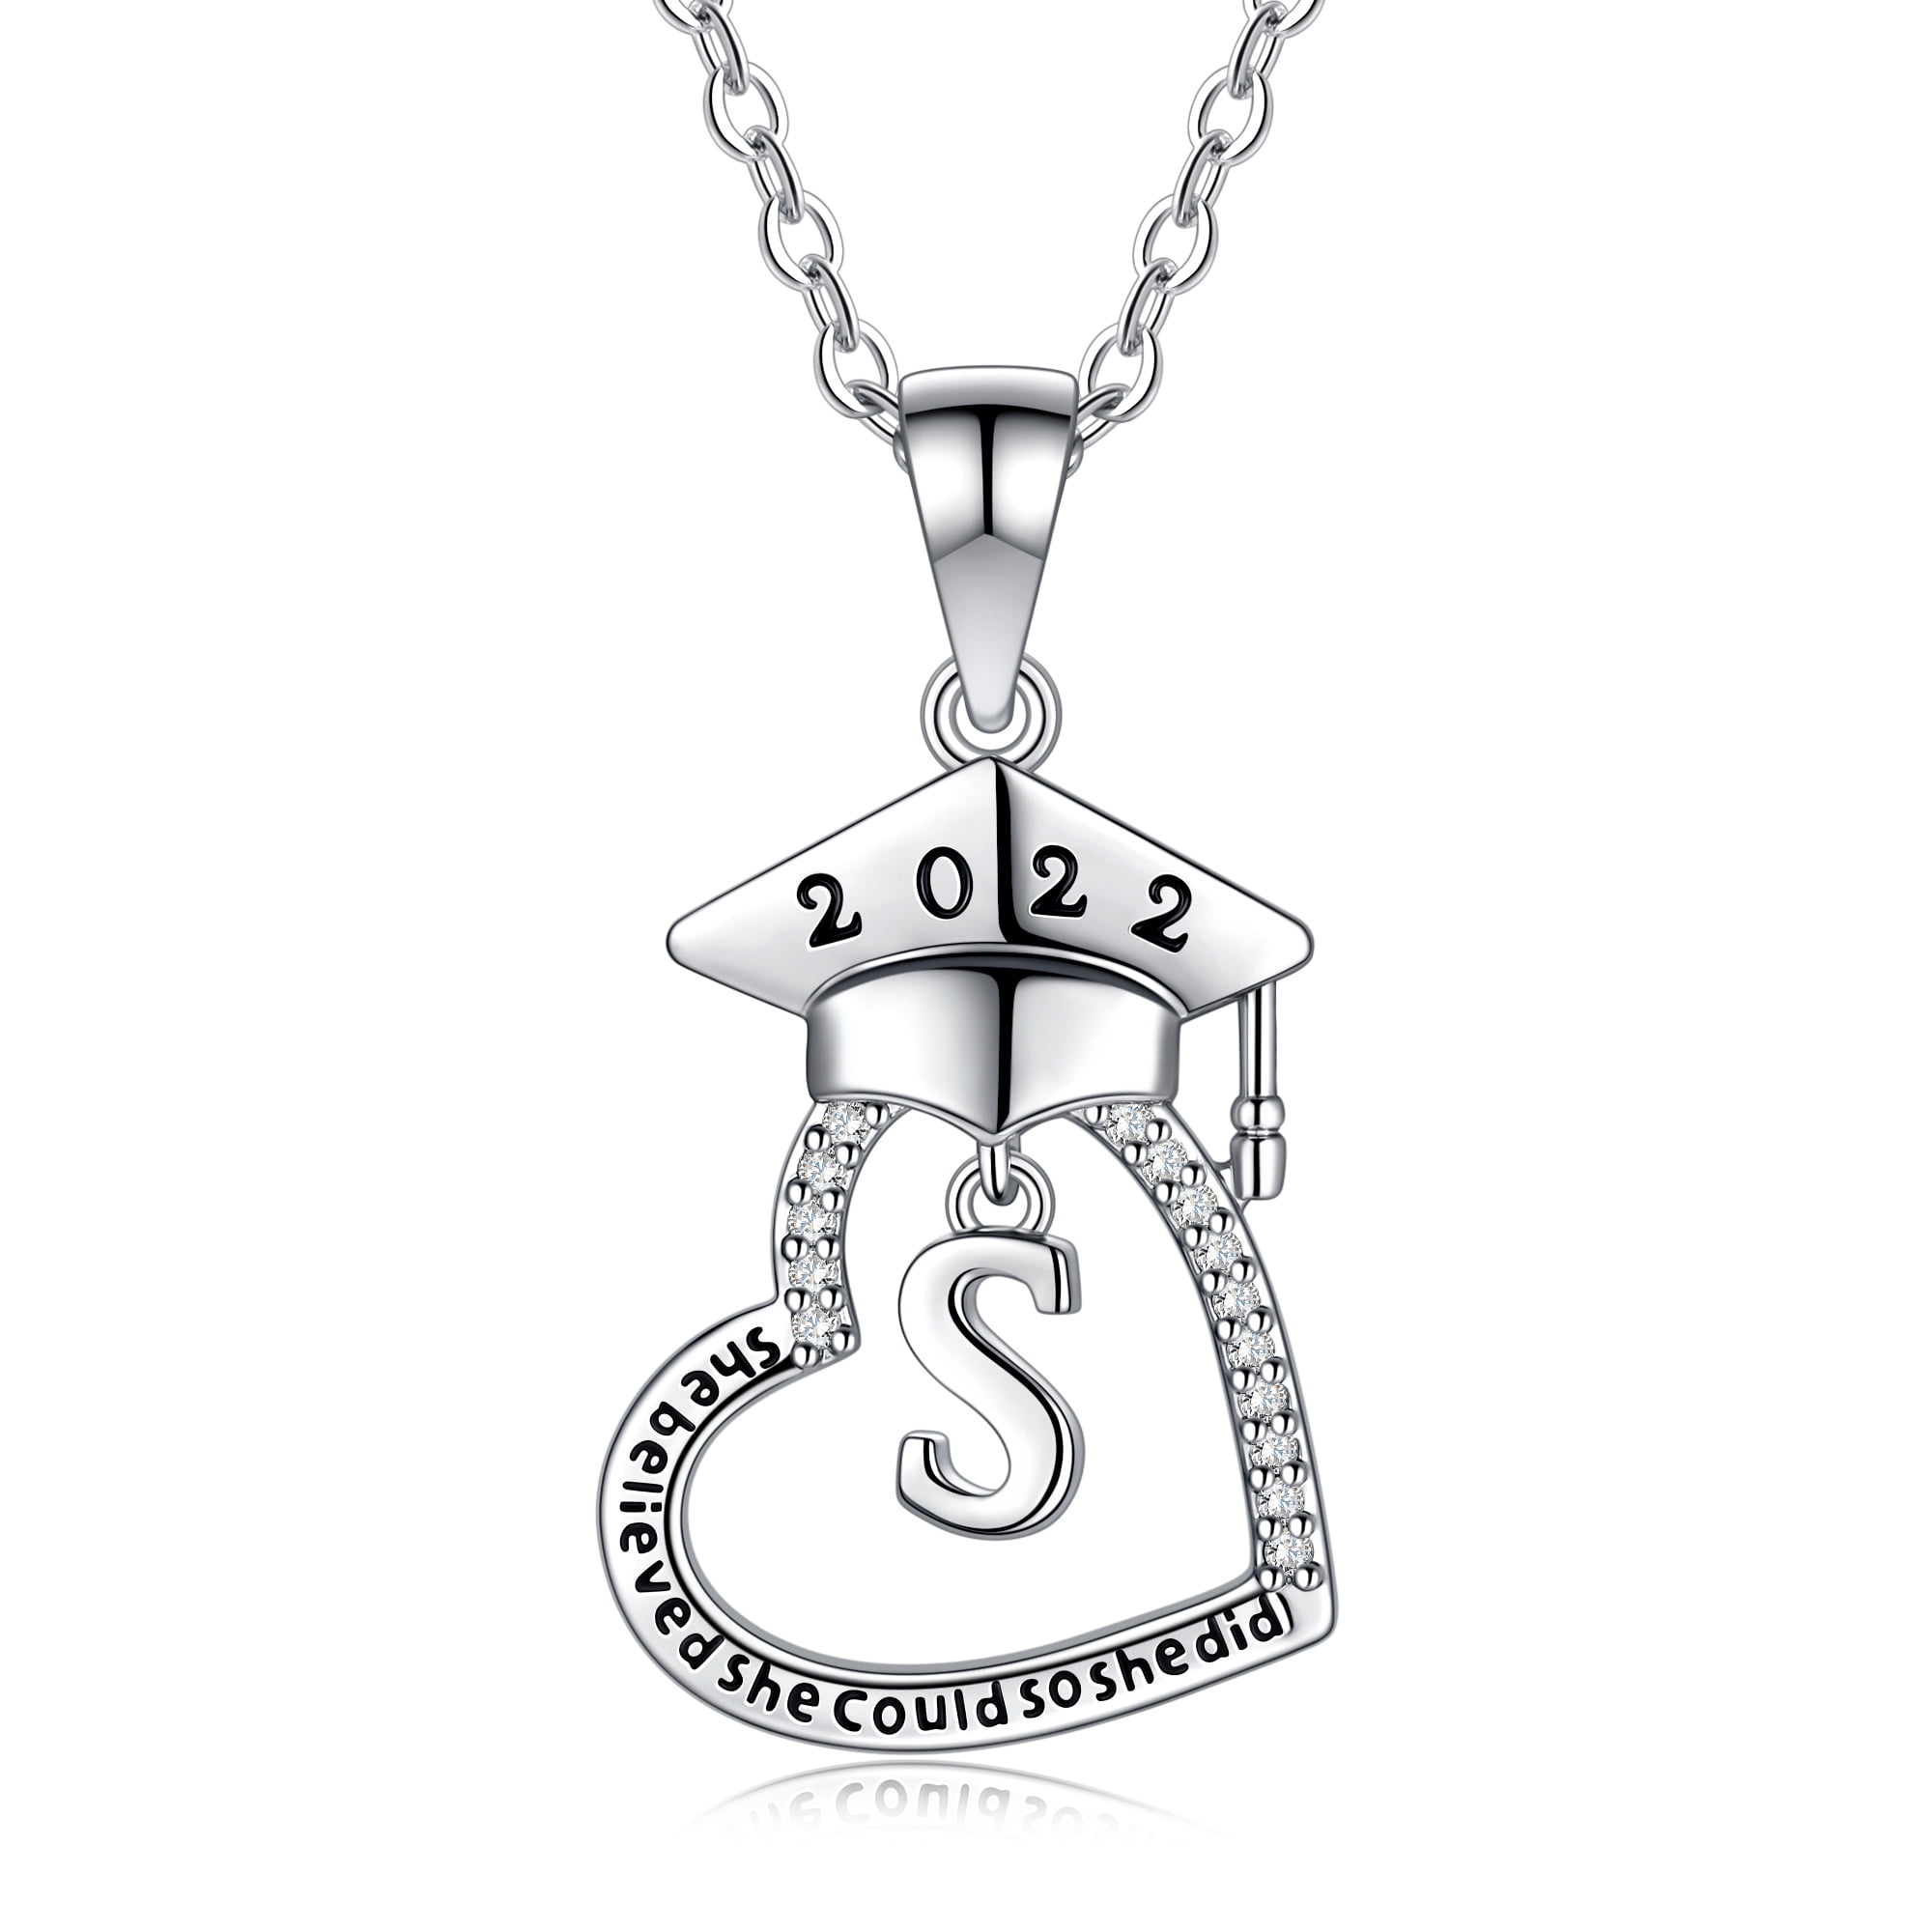 IEFSHINY Graduation Gifts for Her Class of 2022 High School College Graduation Gifts for Daughter Best Friends 5509f15c 203a 4f68 a1f4 98bdde0aa704.9d2d2d3135c4d00b2f91cffb583cd041